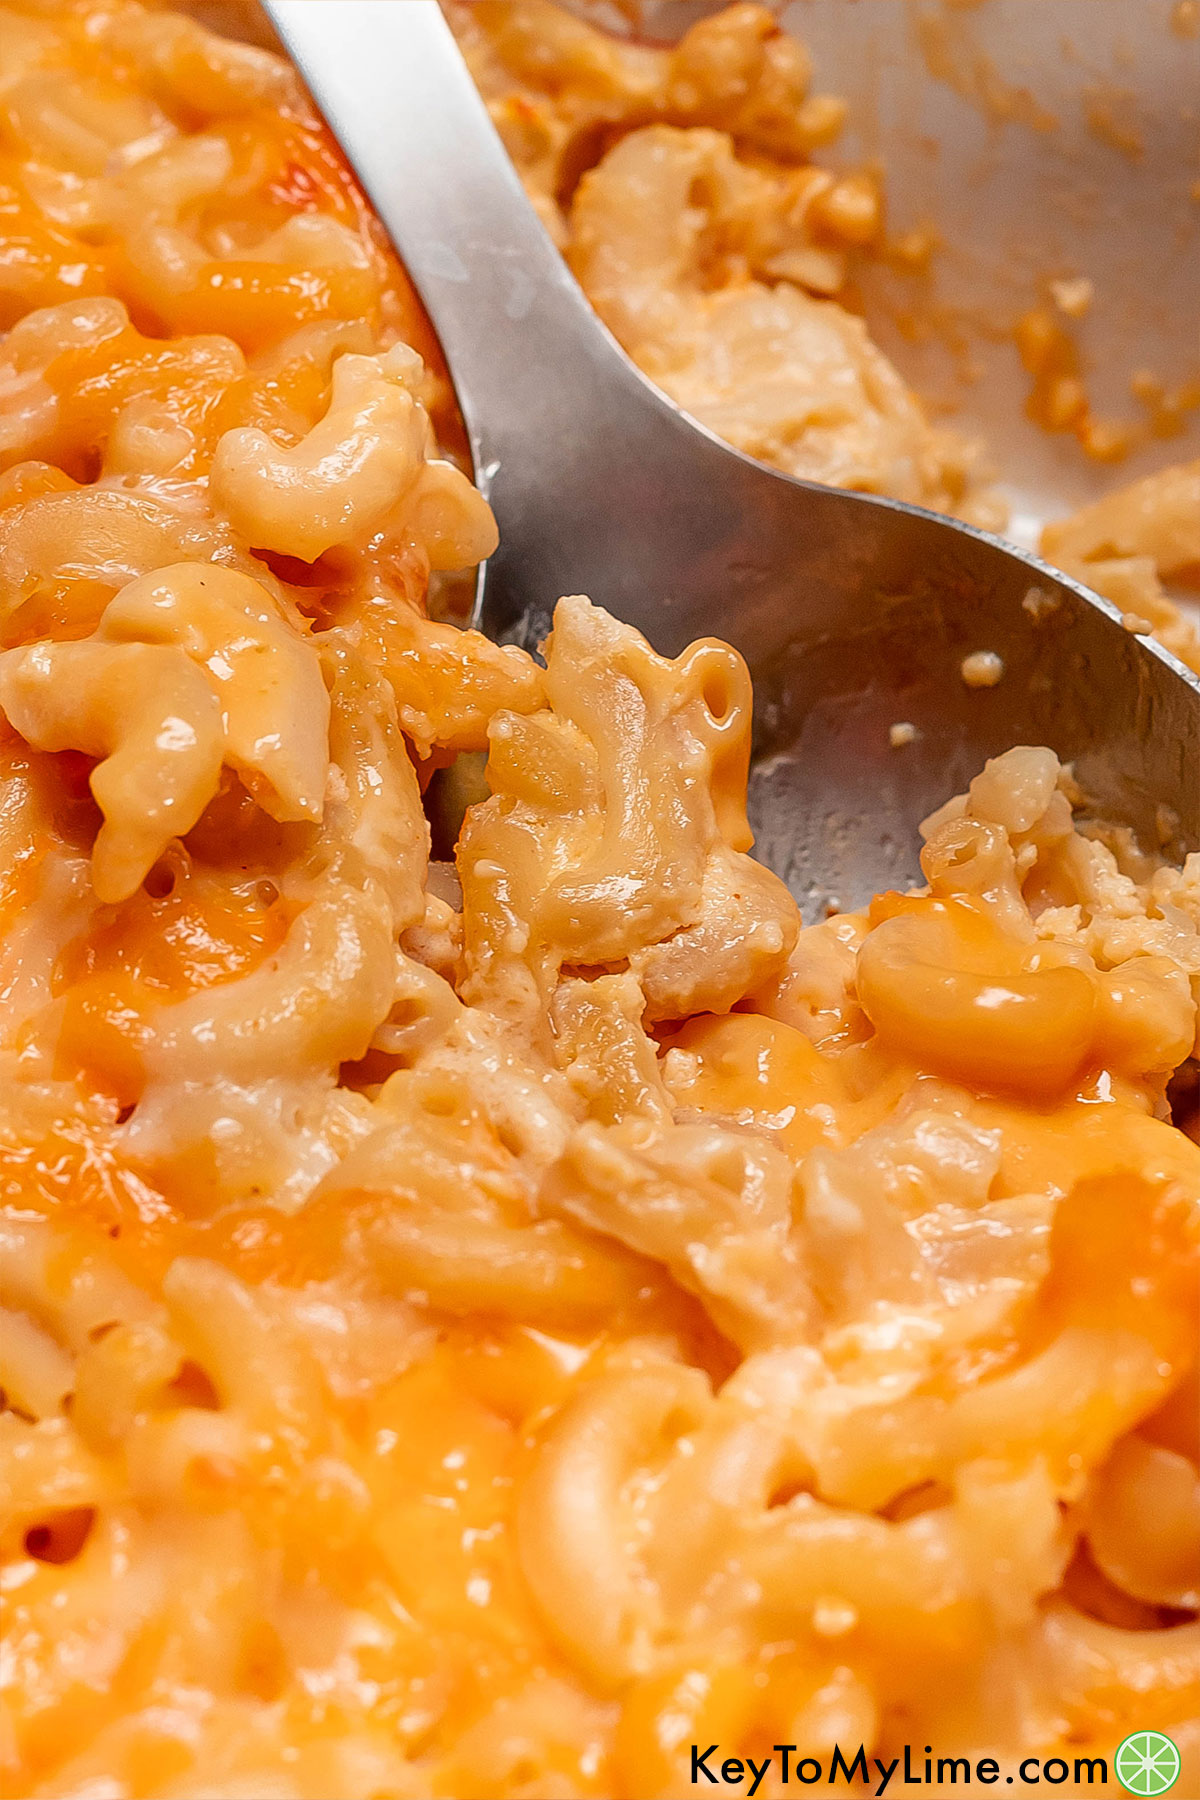 A close up image of a serving spoon lifting up over the rainbow mac and cheese in a casserole dish.